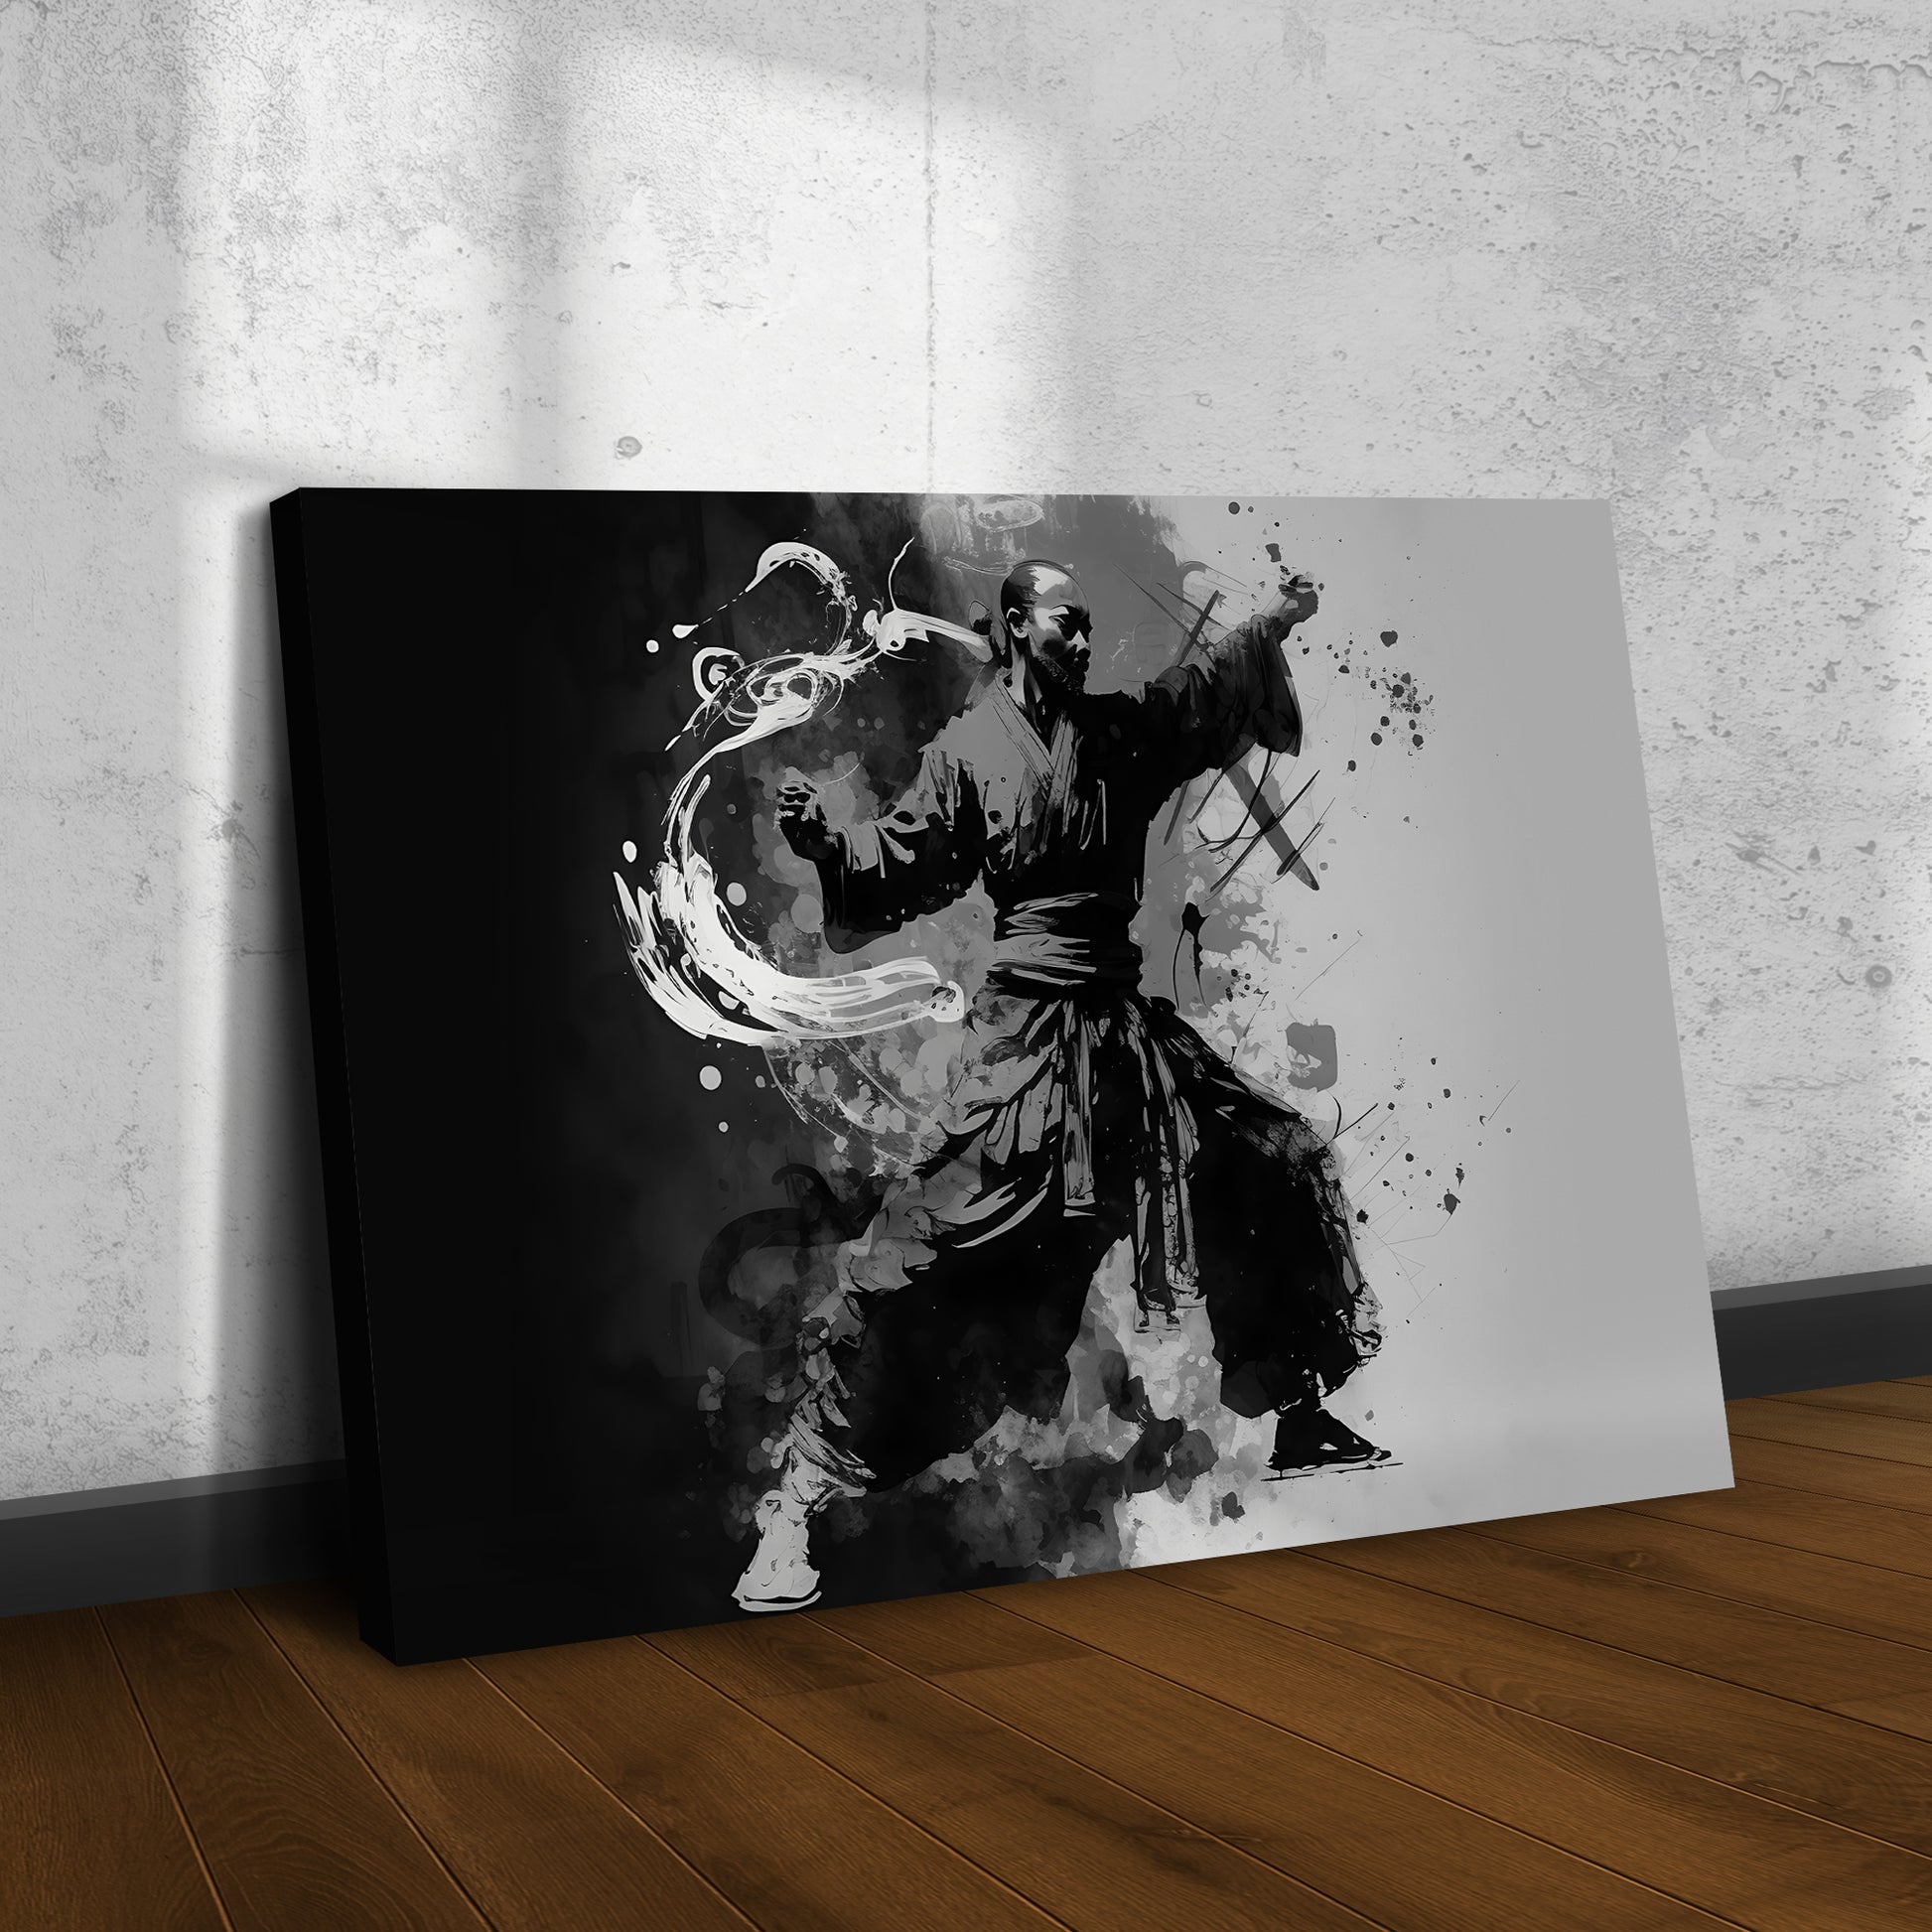 Kung Fu Wudang Fist Canvas Wall Art - Image by Tailored Canvases